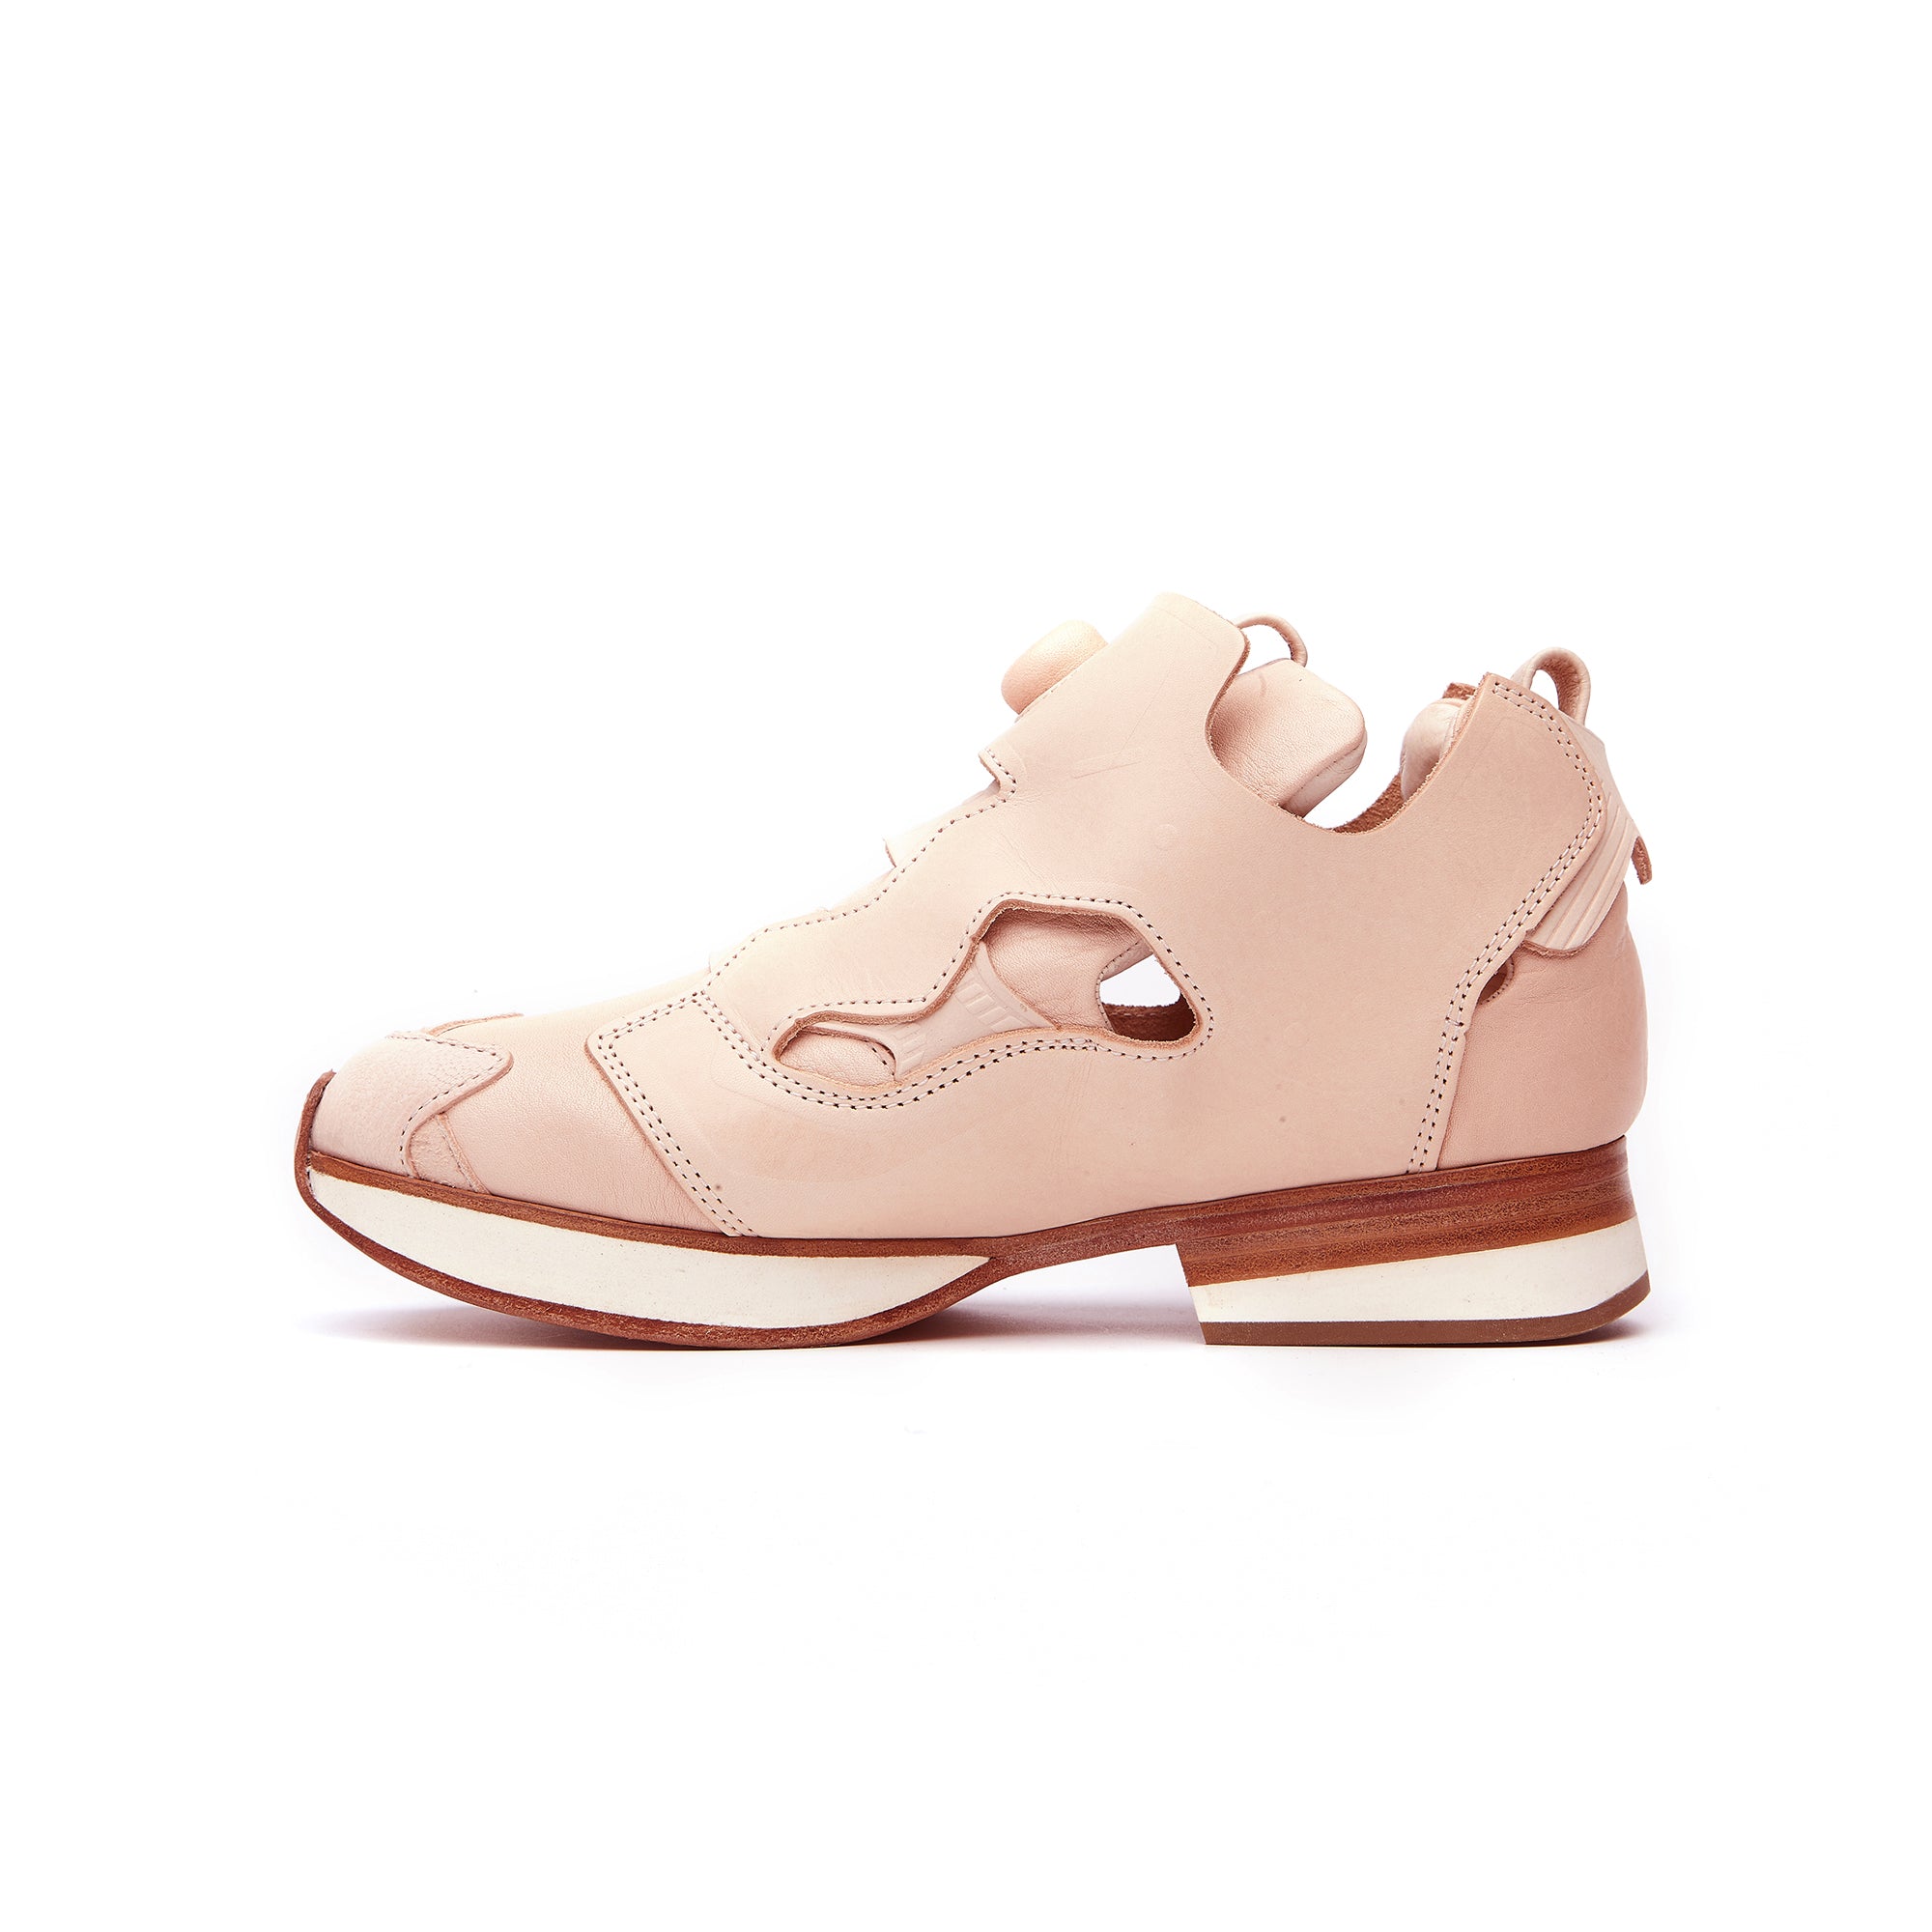 Hender Scheme Mens Manual Industrial Products 15 Shoes – Extra Butter